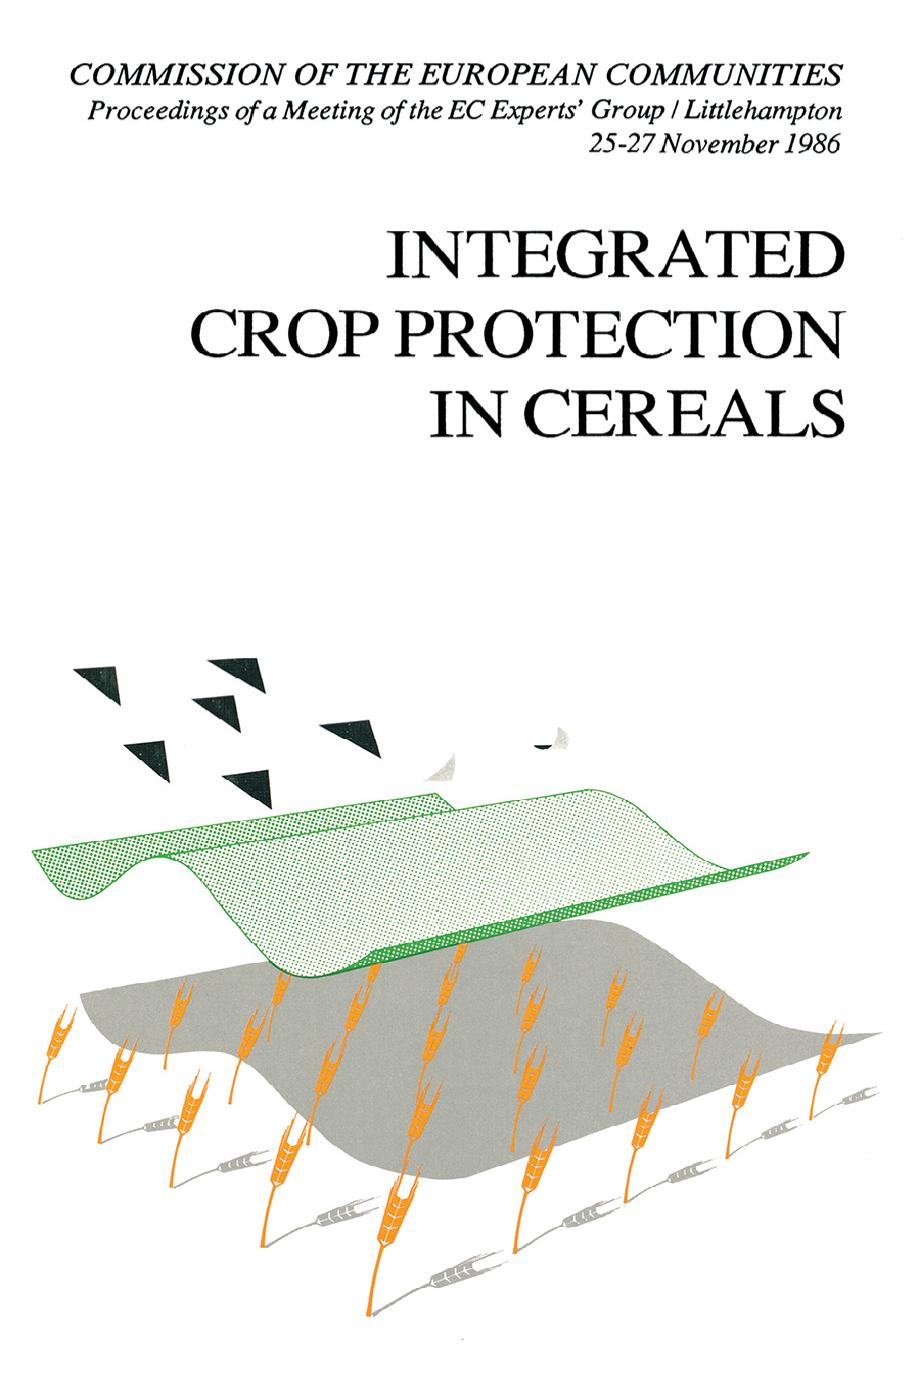 Integrated Crop Protection in Cereals